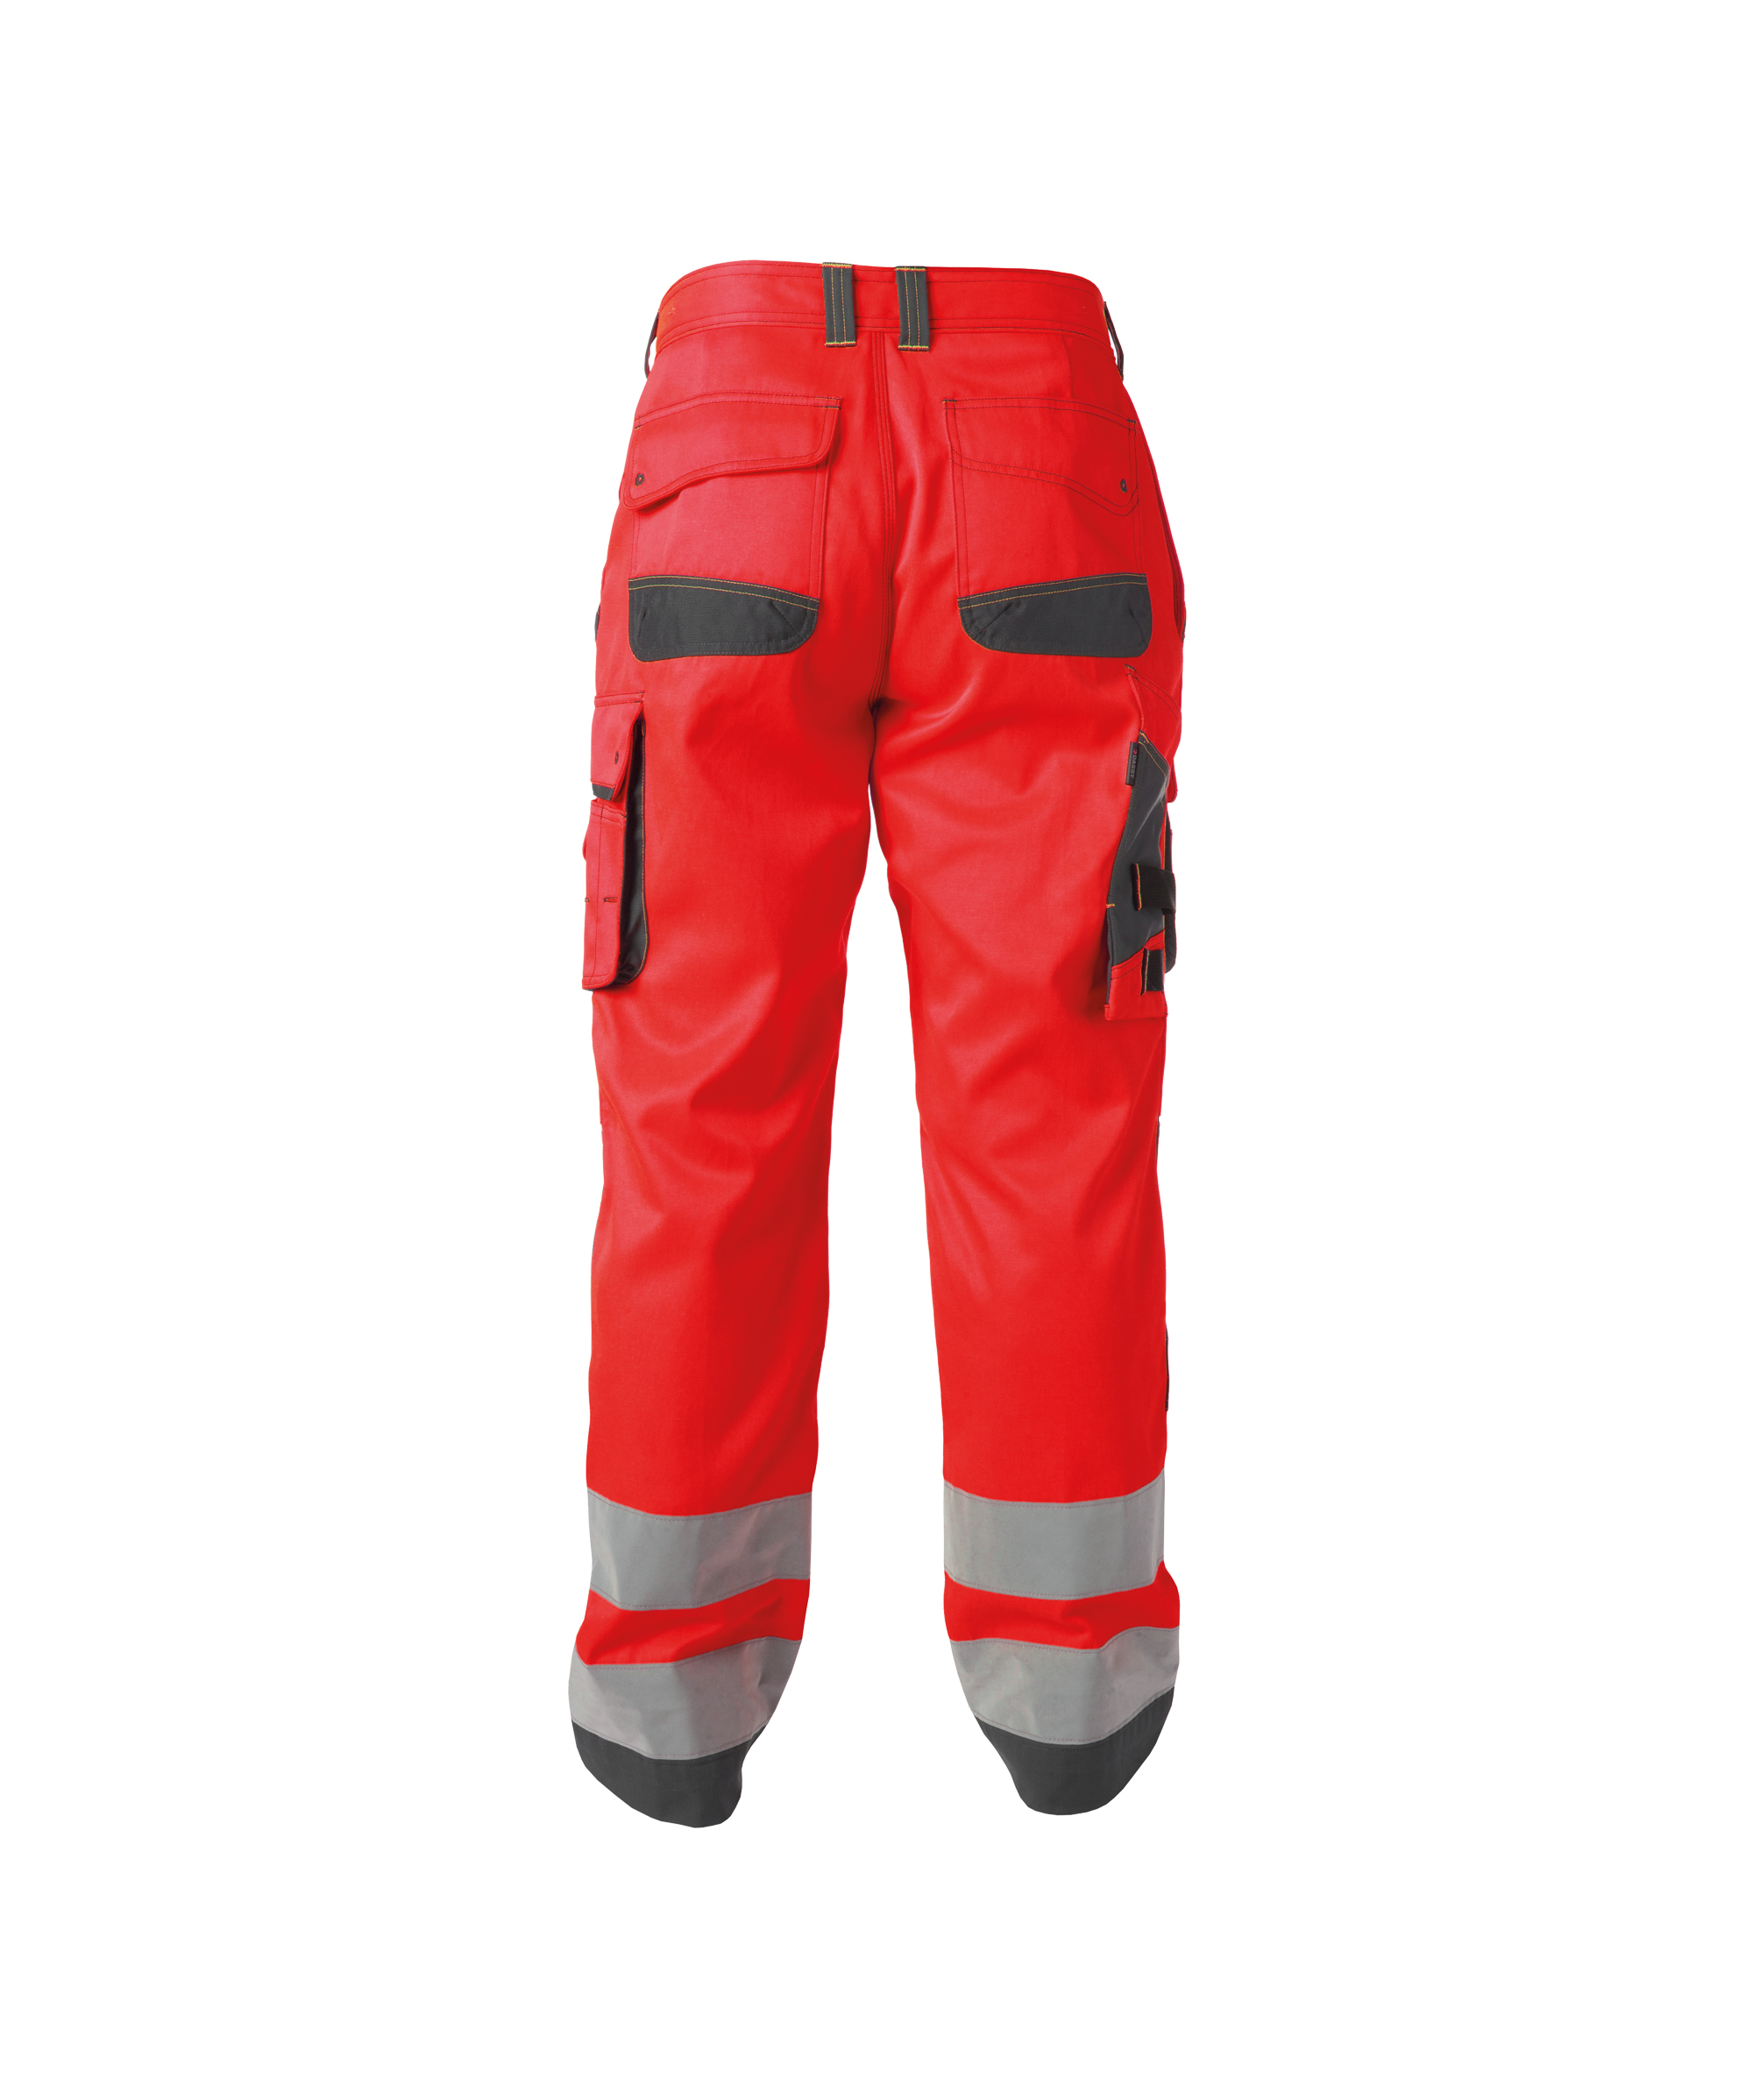 chicago_high-visibility-work-trousers-with-knee-pockets_fluo-red-cement-grey_back.jpg